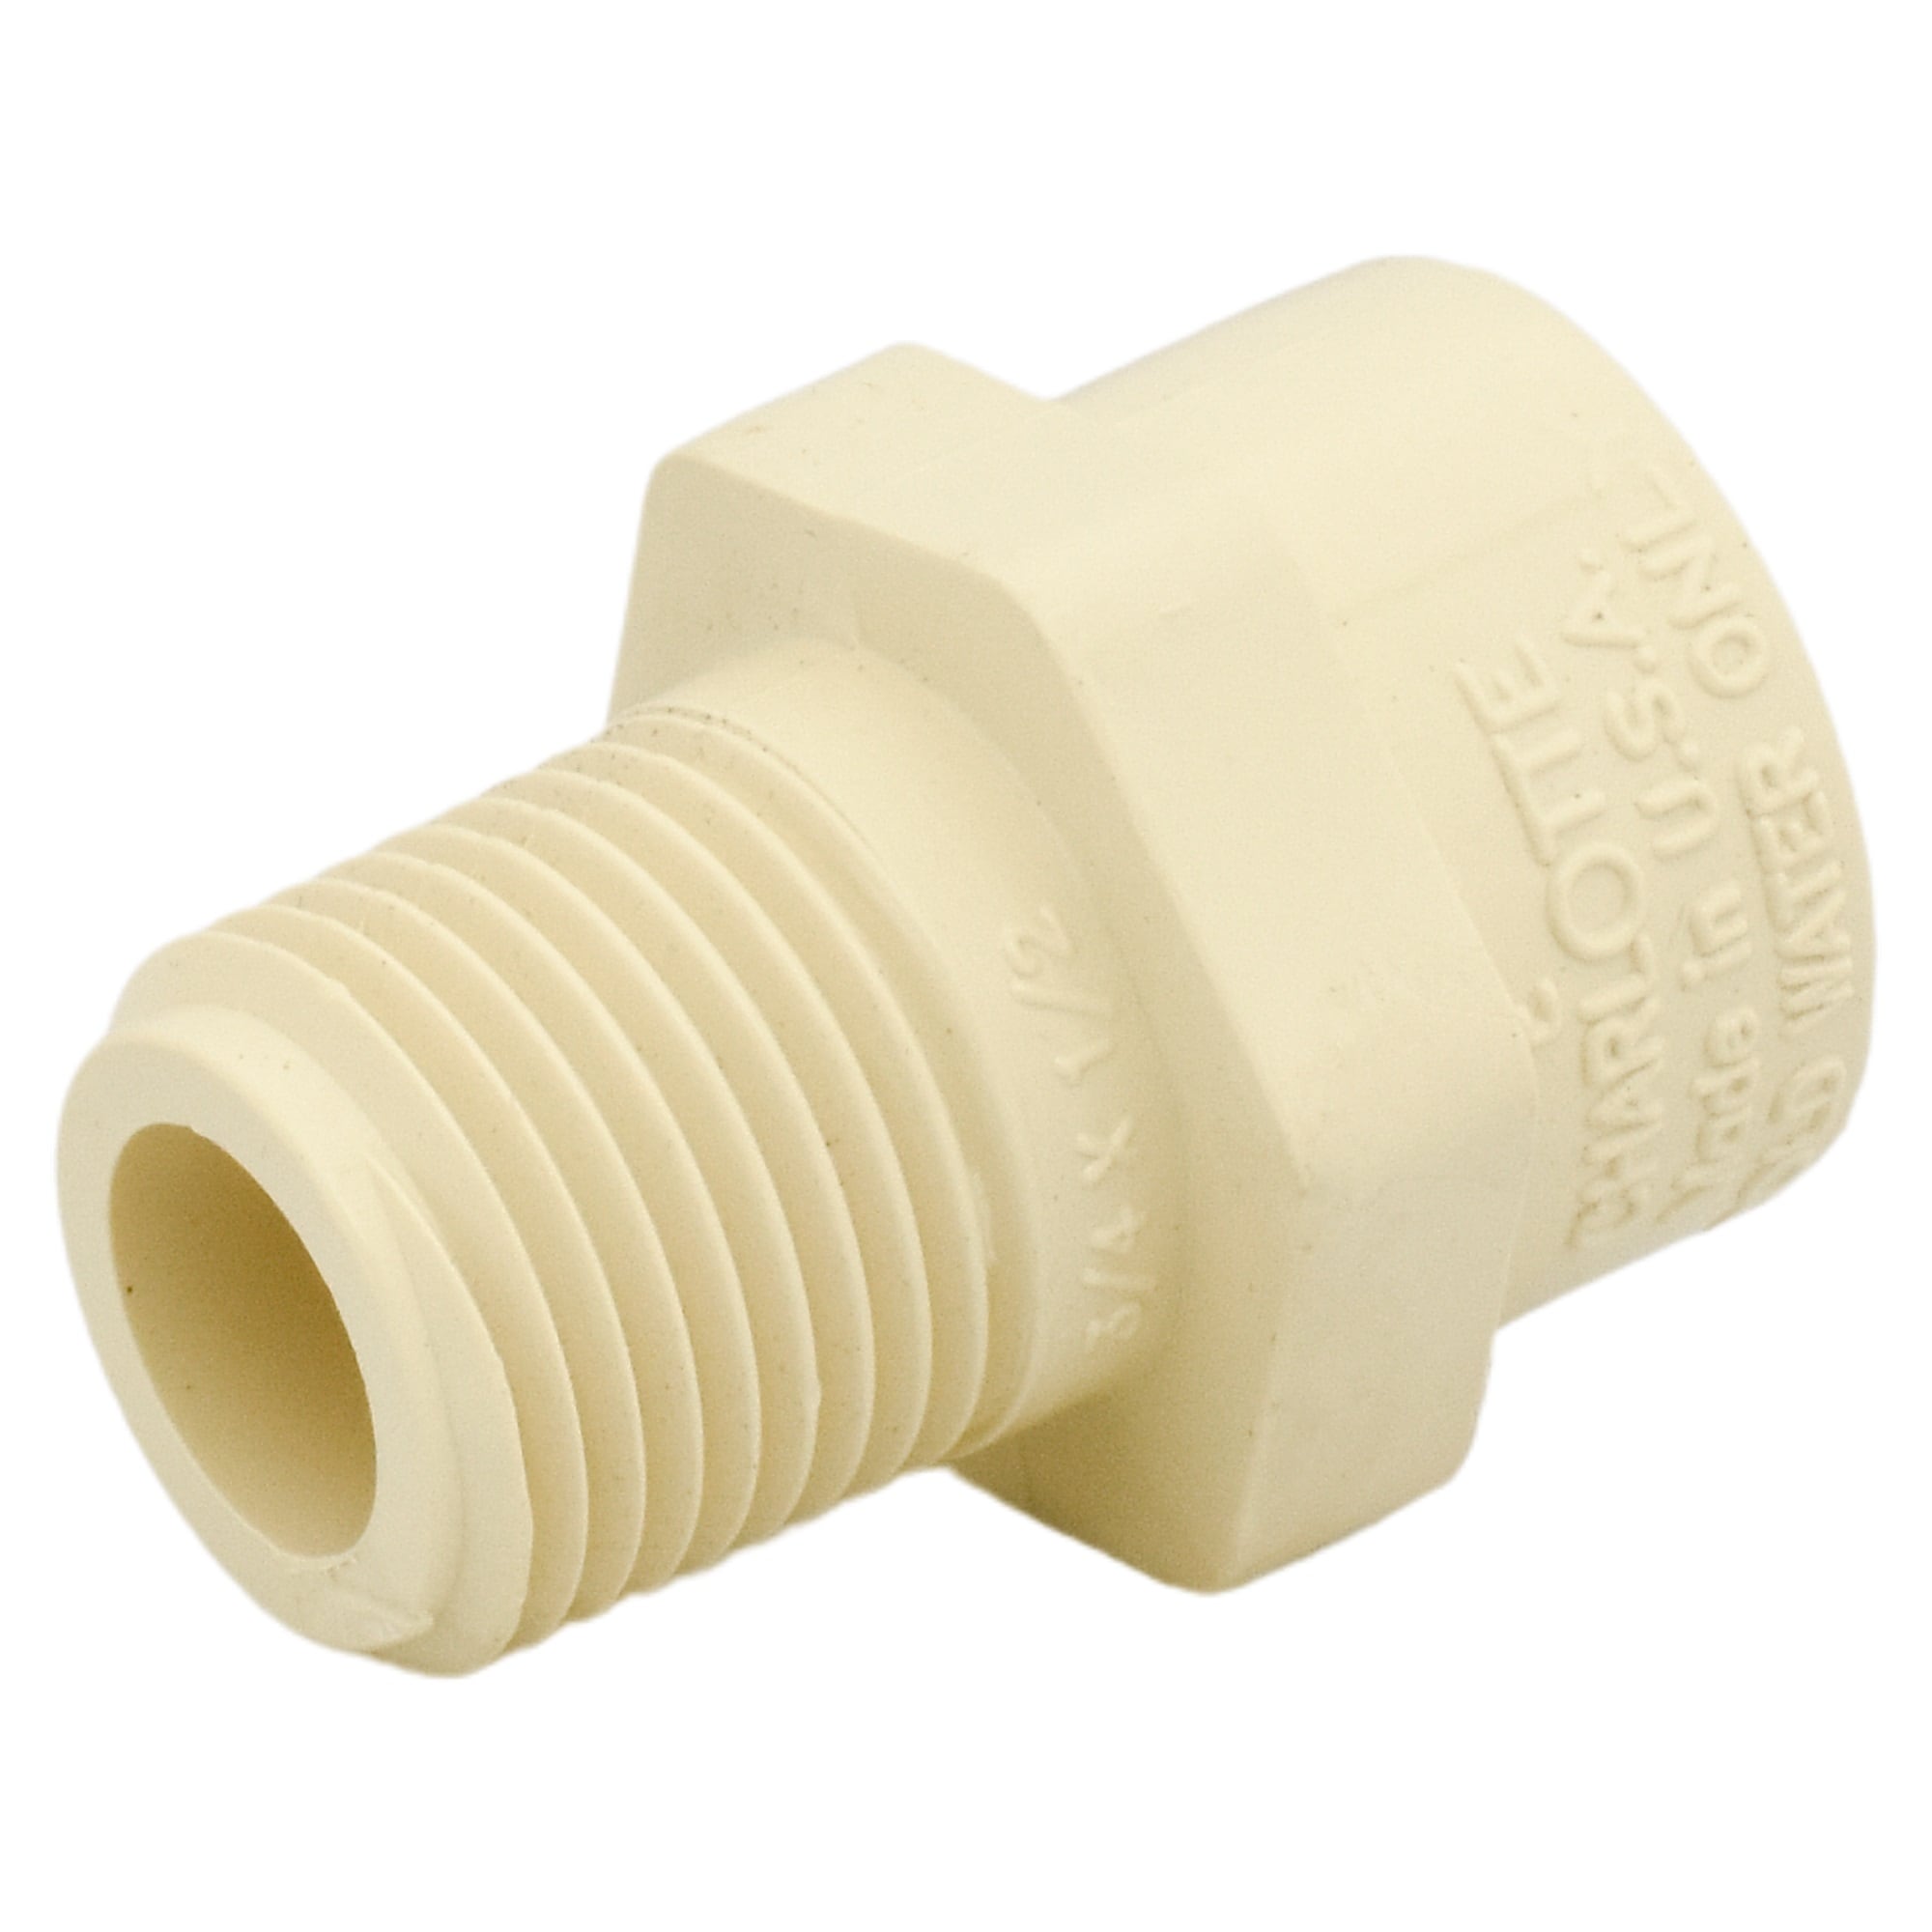 Charlotte Pipe 3/4-in Socket x 1/2-in CPVC Male Adapter | CTS 02110 0600 -  CTS 02110  0600